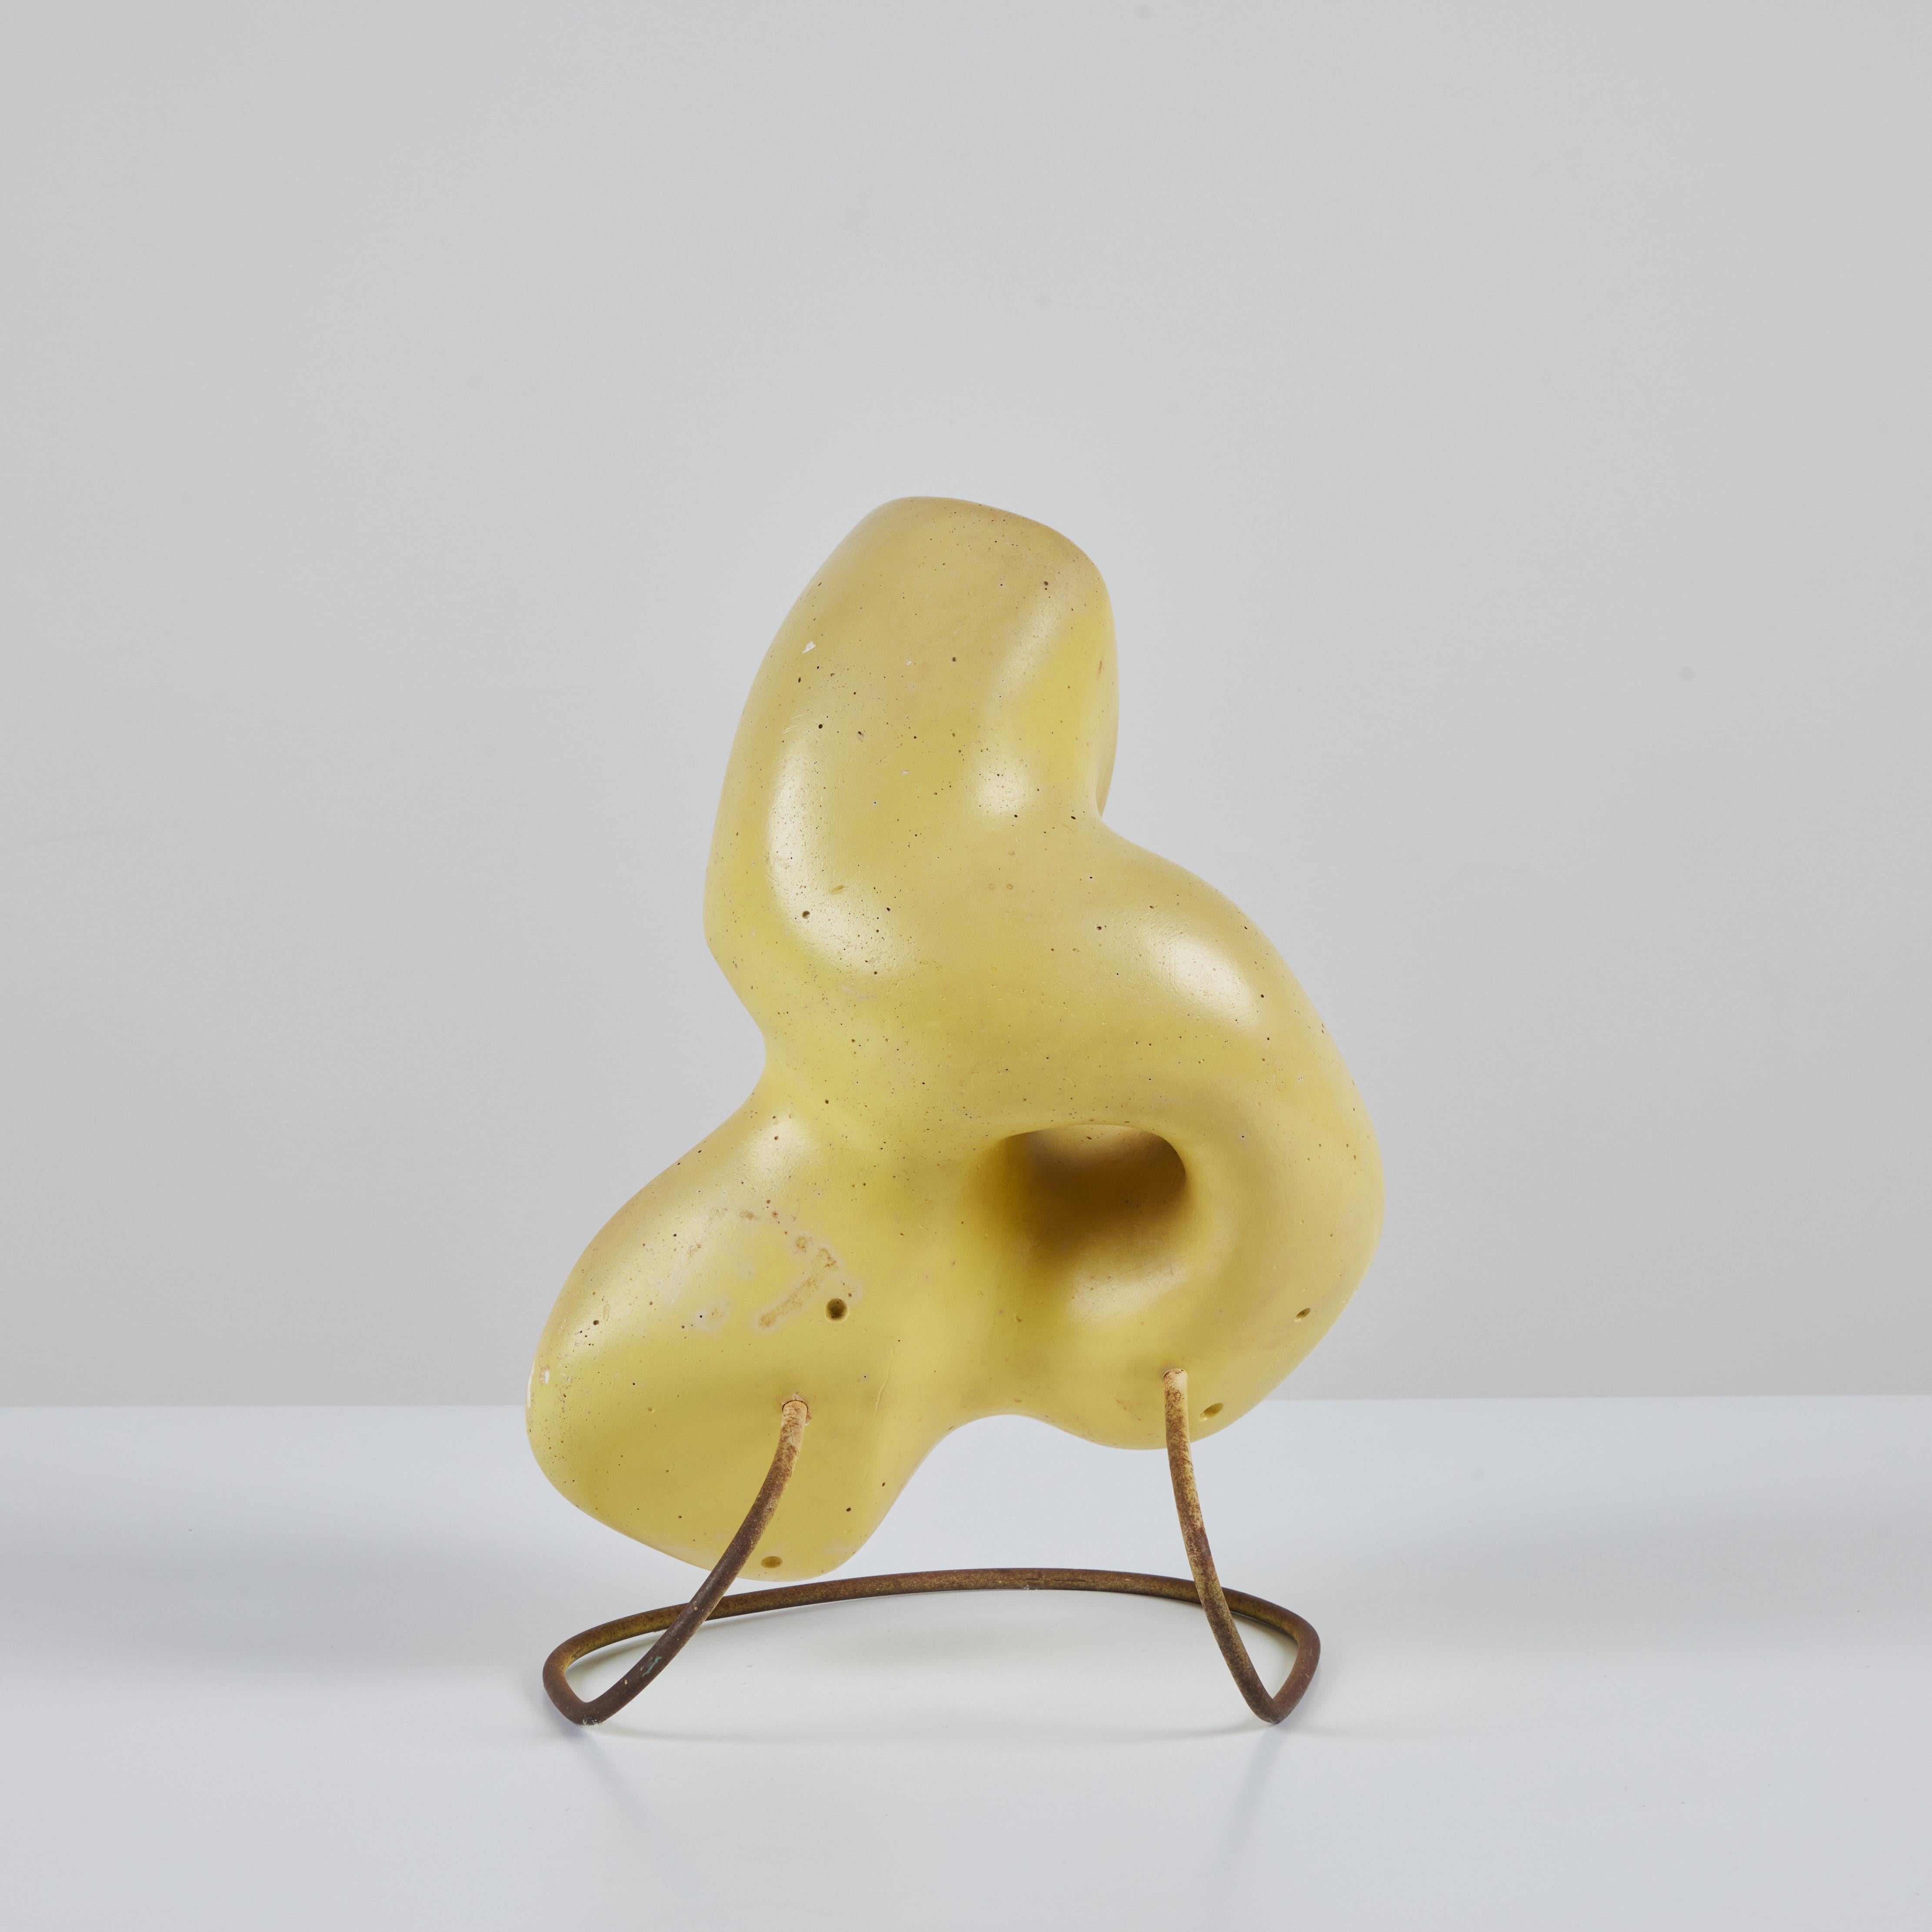 Biomorphic Yellow Glazed Sculpture For Sale 1